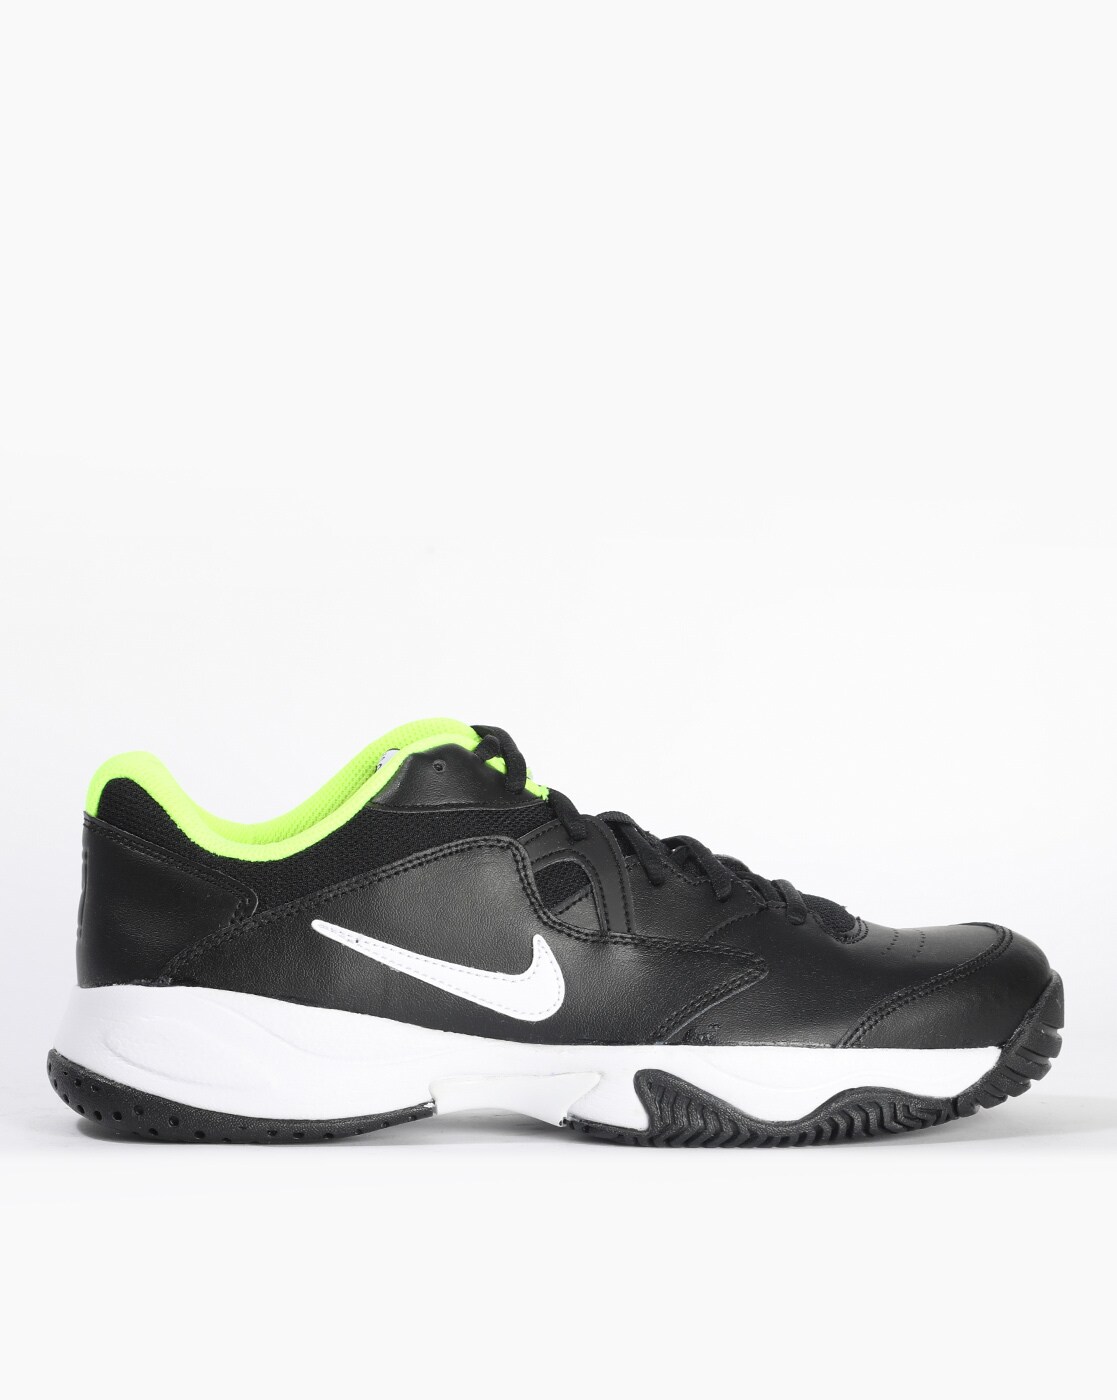 discounted tennis shoes online